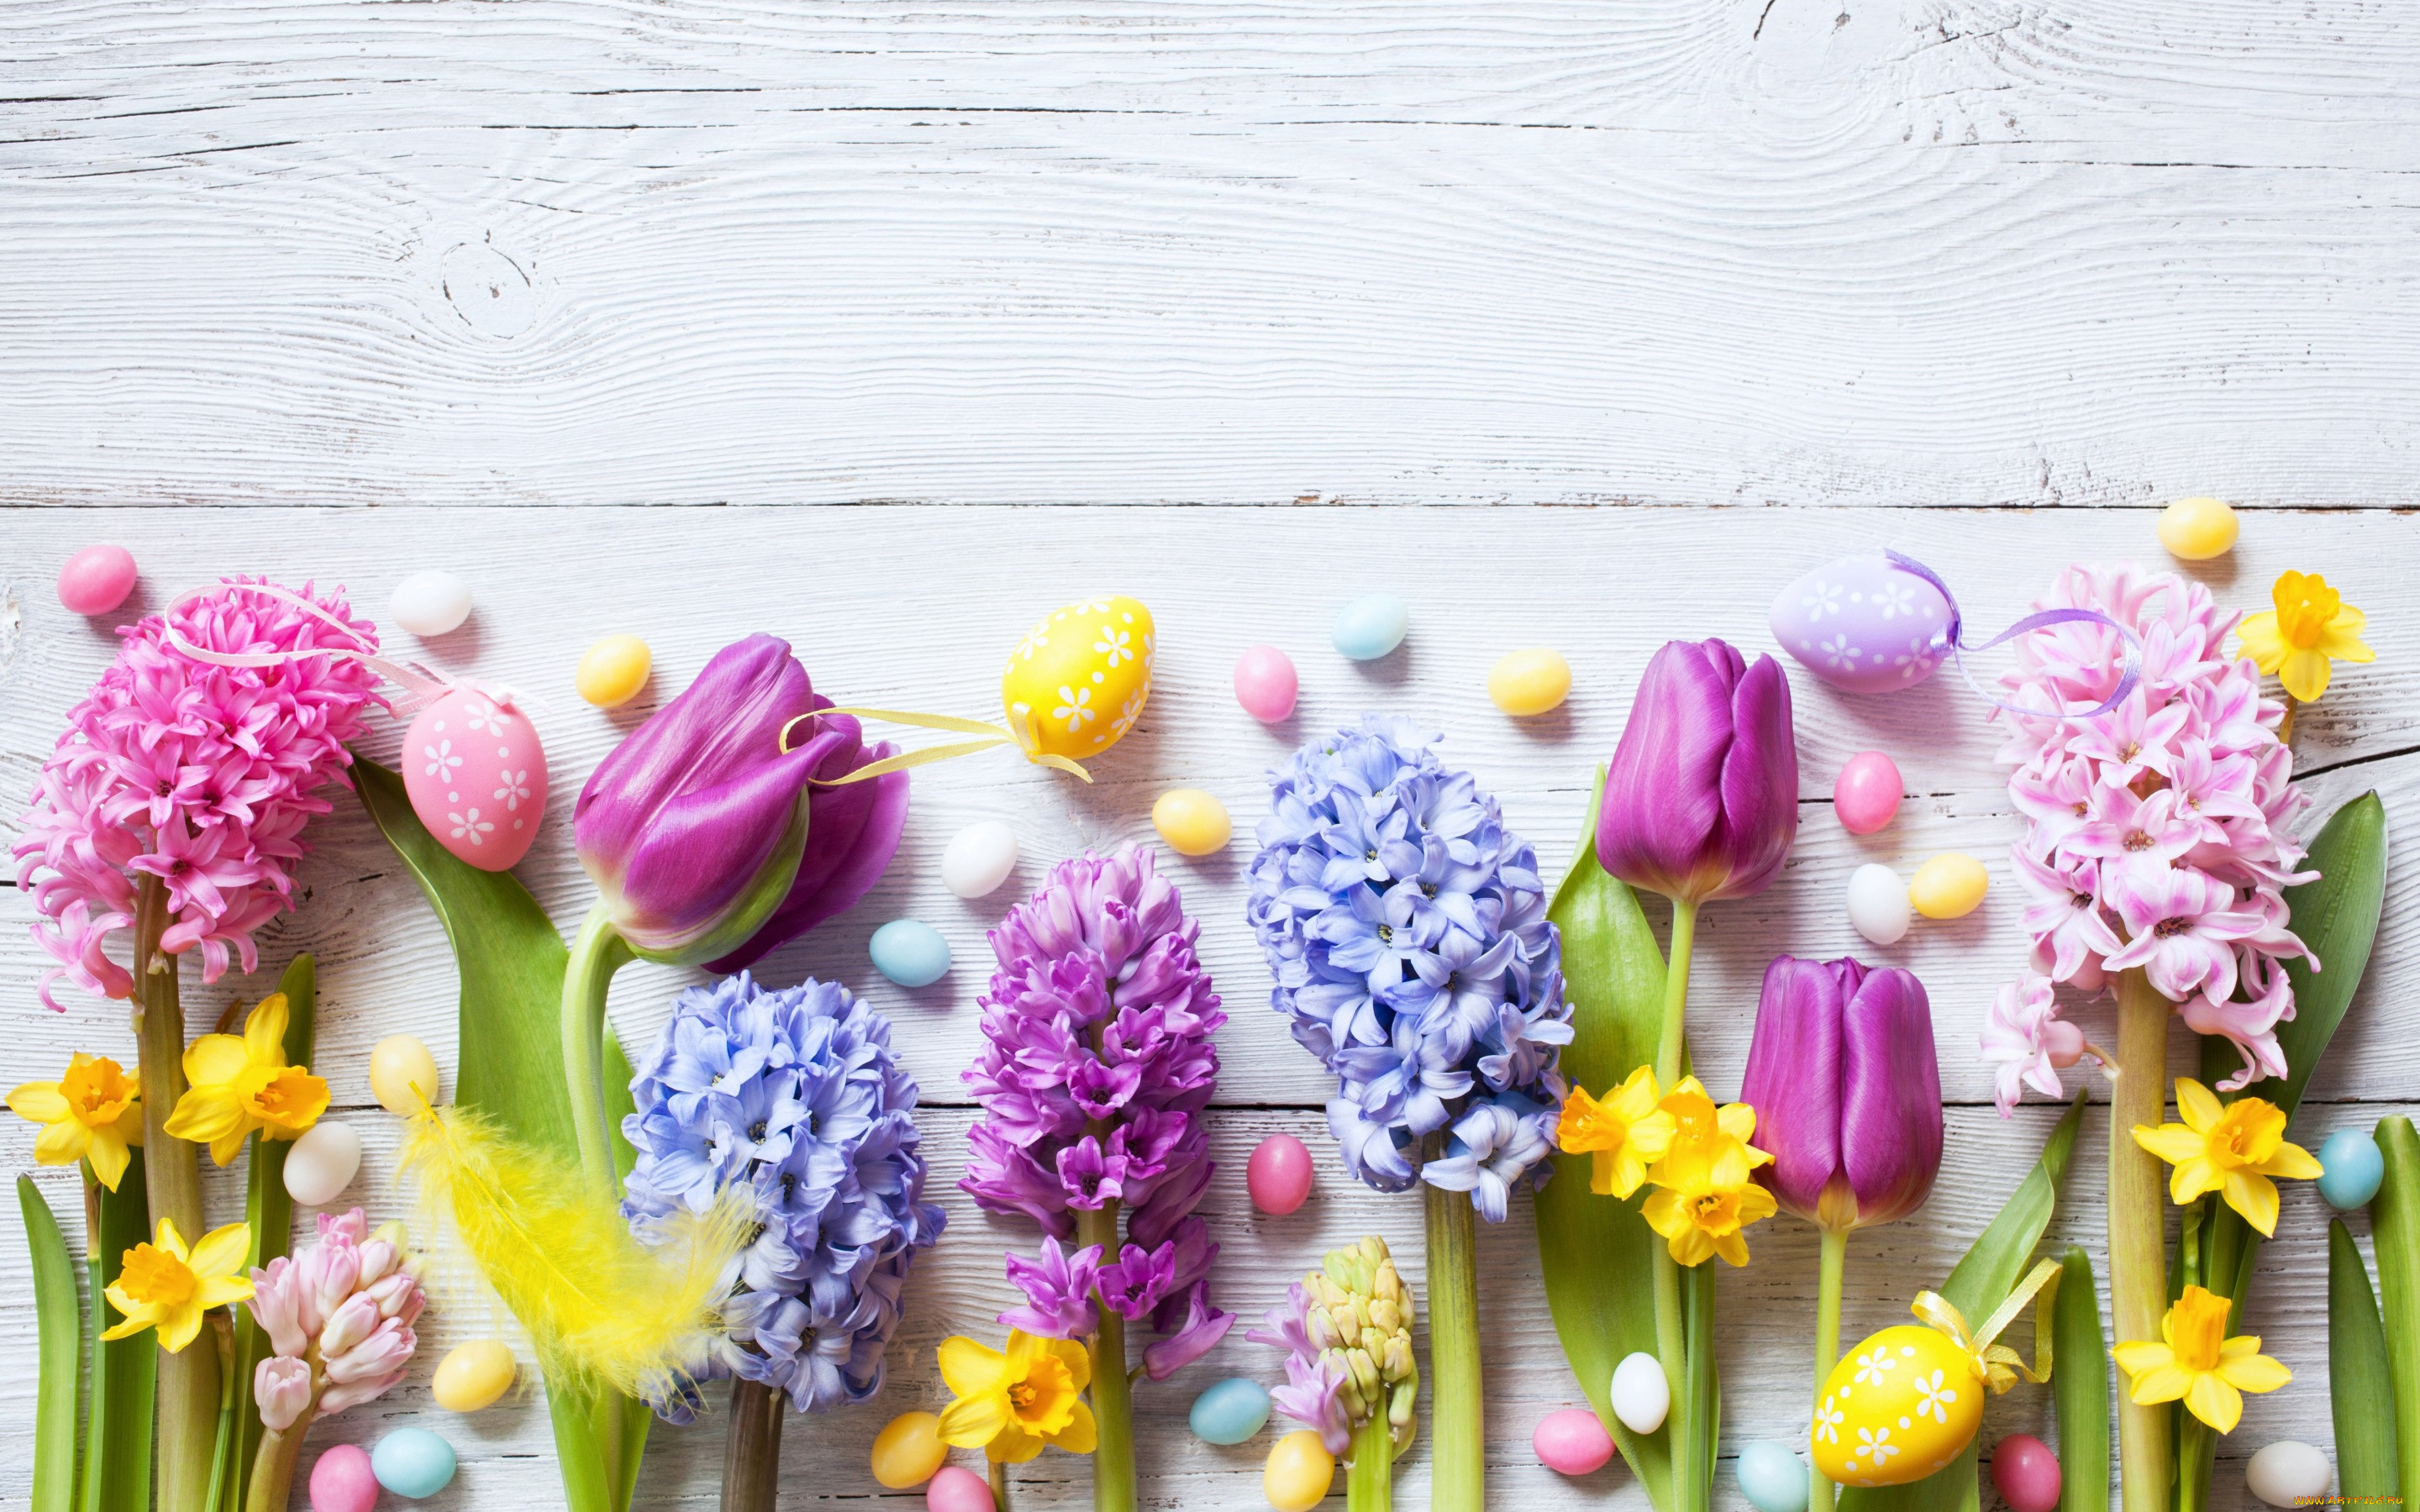 , , , flowers, eggs, tulips, wood, decoration, happy, spring, , , , , , easter, colorful, 